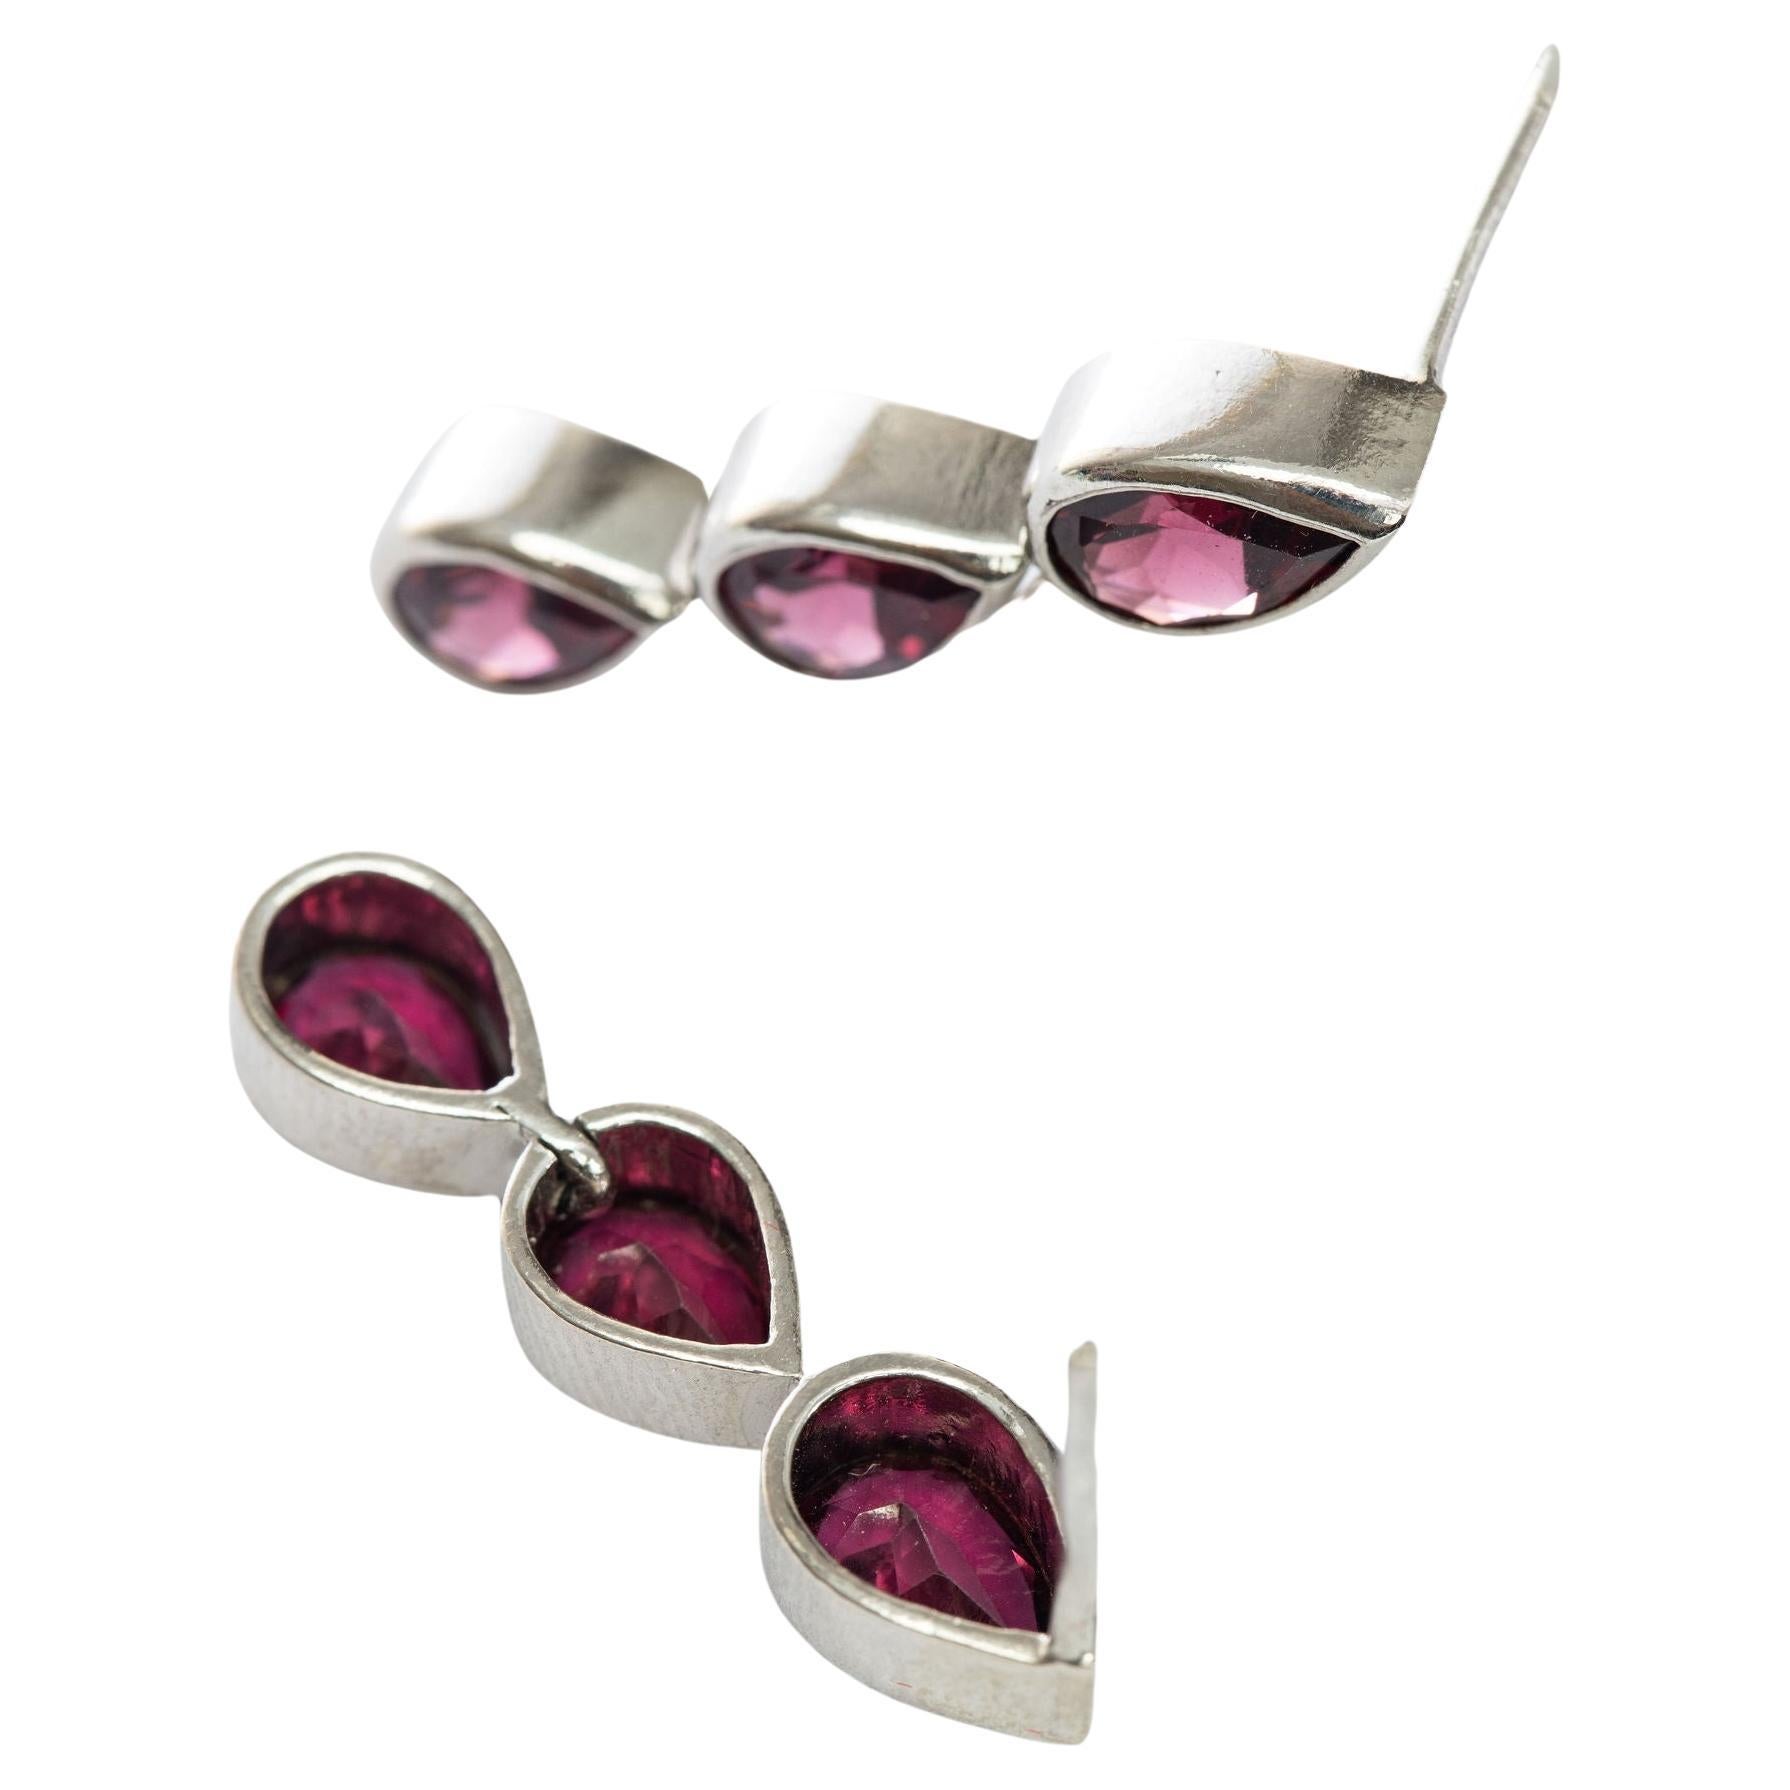 Dress your ears in sophistication with our 3-Stone Pear Cut Garnet Pin Drop Earrings, With a trio of 3 pear cut garnets per earring, these Pin Drop Earrings guarantee maximum sparkle and brilliance, allowing you to effortlessly captivate attention